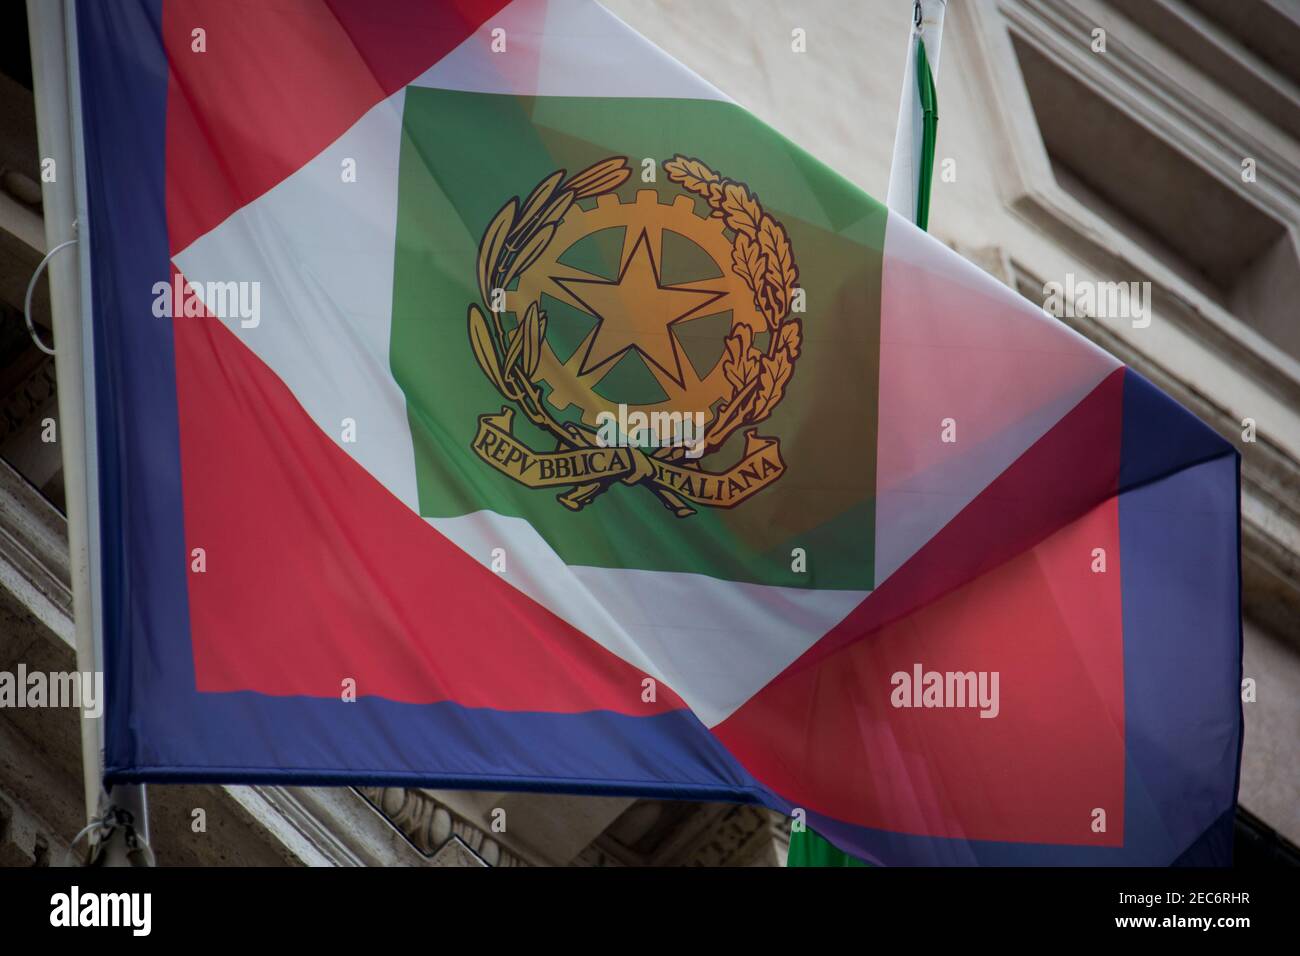 Rome, Italy. 13th Feb, 2021. Italian Republic flag. The new Italian Government, lead by Professor and former President of the European Central Bank Mario Draghi, leaves the Quirinale Palace after swearing in front of the President of the Italian Republic, Sergio Mattarella. This is the 67th Government of Italy. Credit: LSF Photo/Alamy Live News Stock Photo